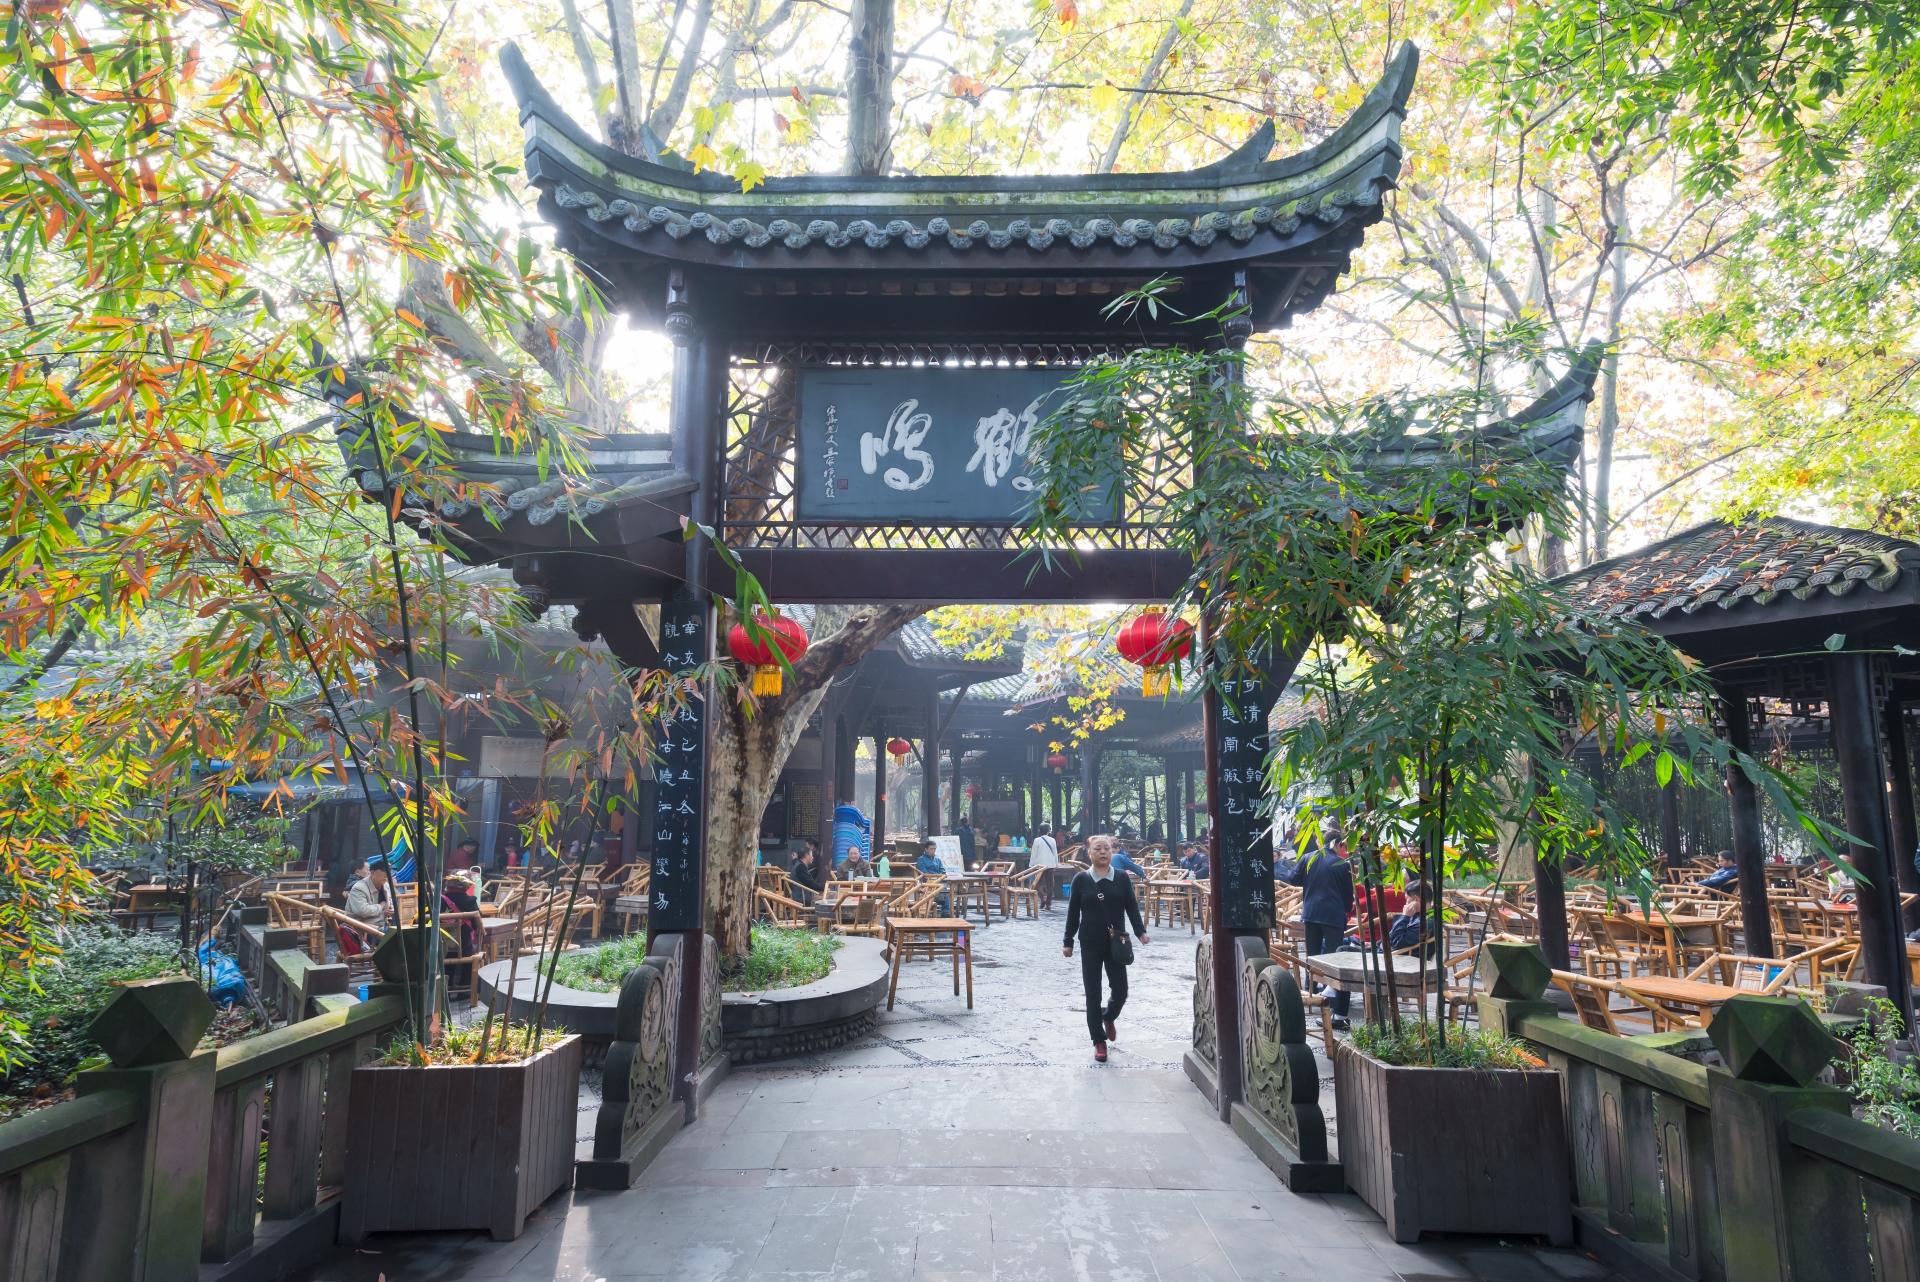 Temple in the Heart of Chengdu - 